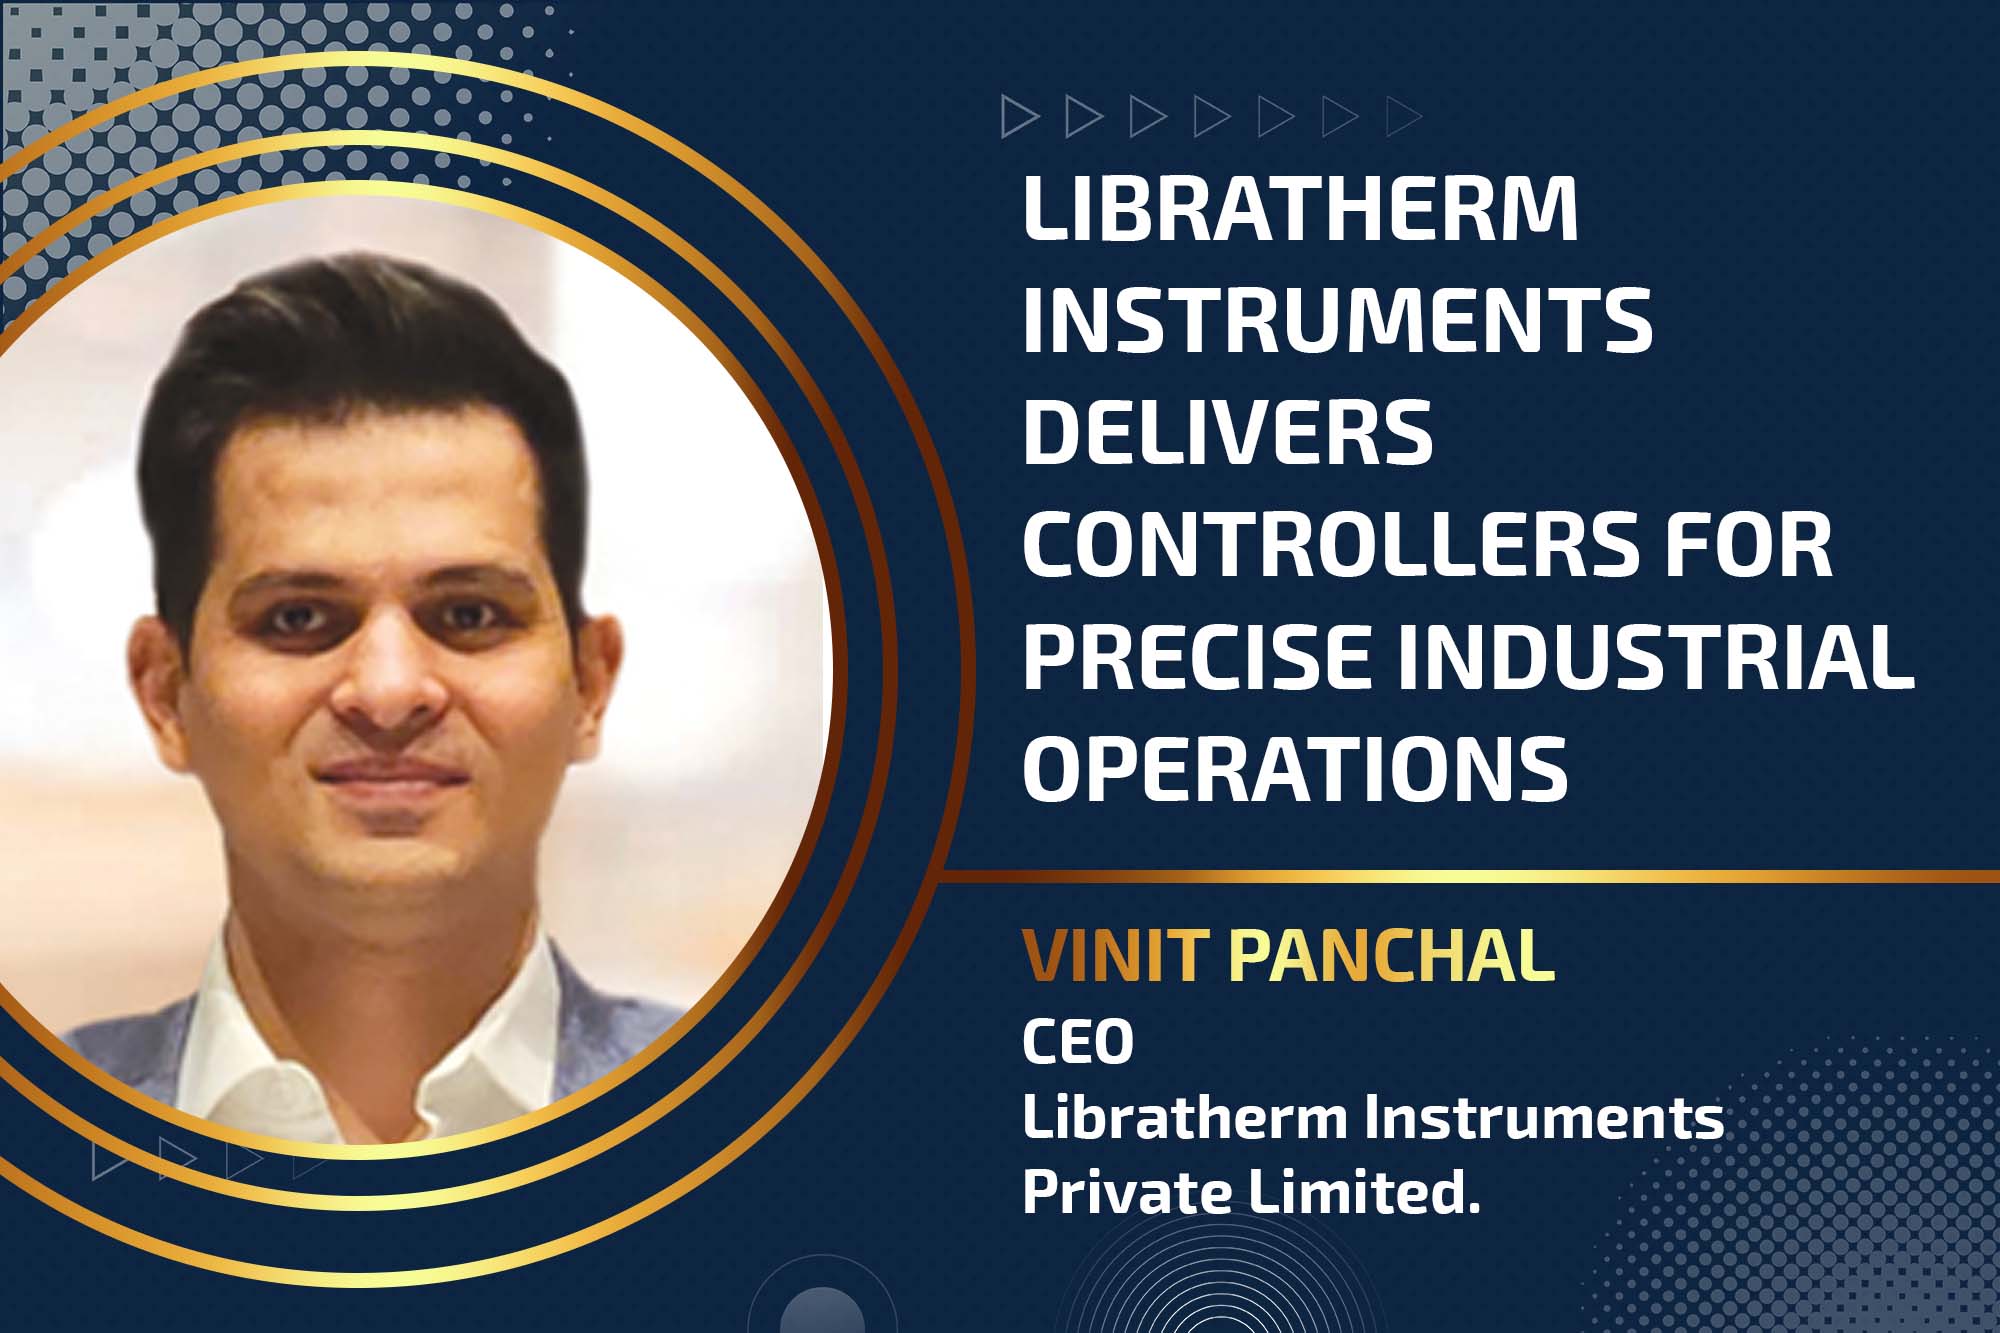 Libratherm Instruments delivers controllers for precise industrial operations